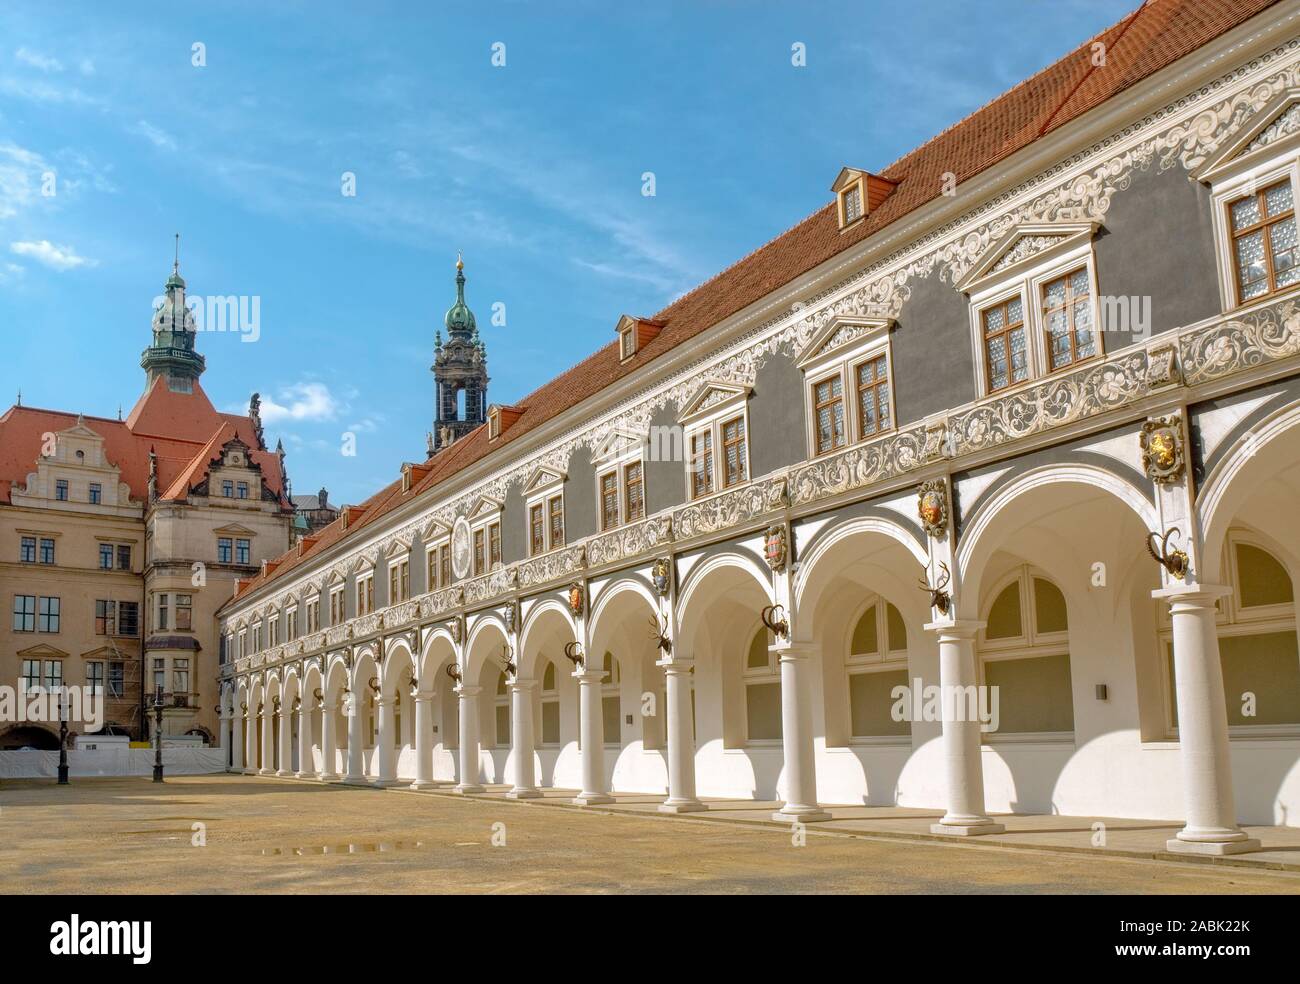 Stallhof at Dresden Castle, Saxony, Germany, was part of the building complex of the Residenzschloss and served as a venue for riding tournaments Stock Photo